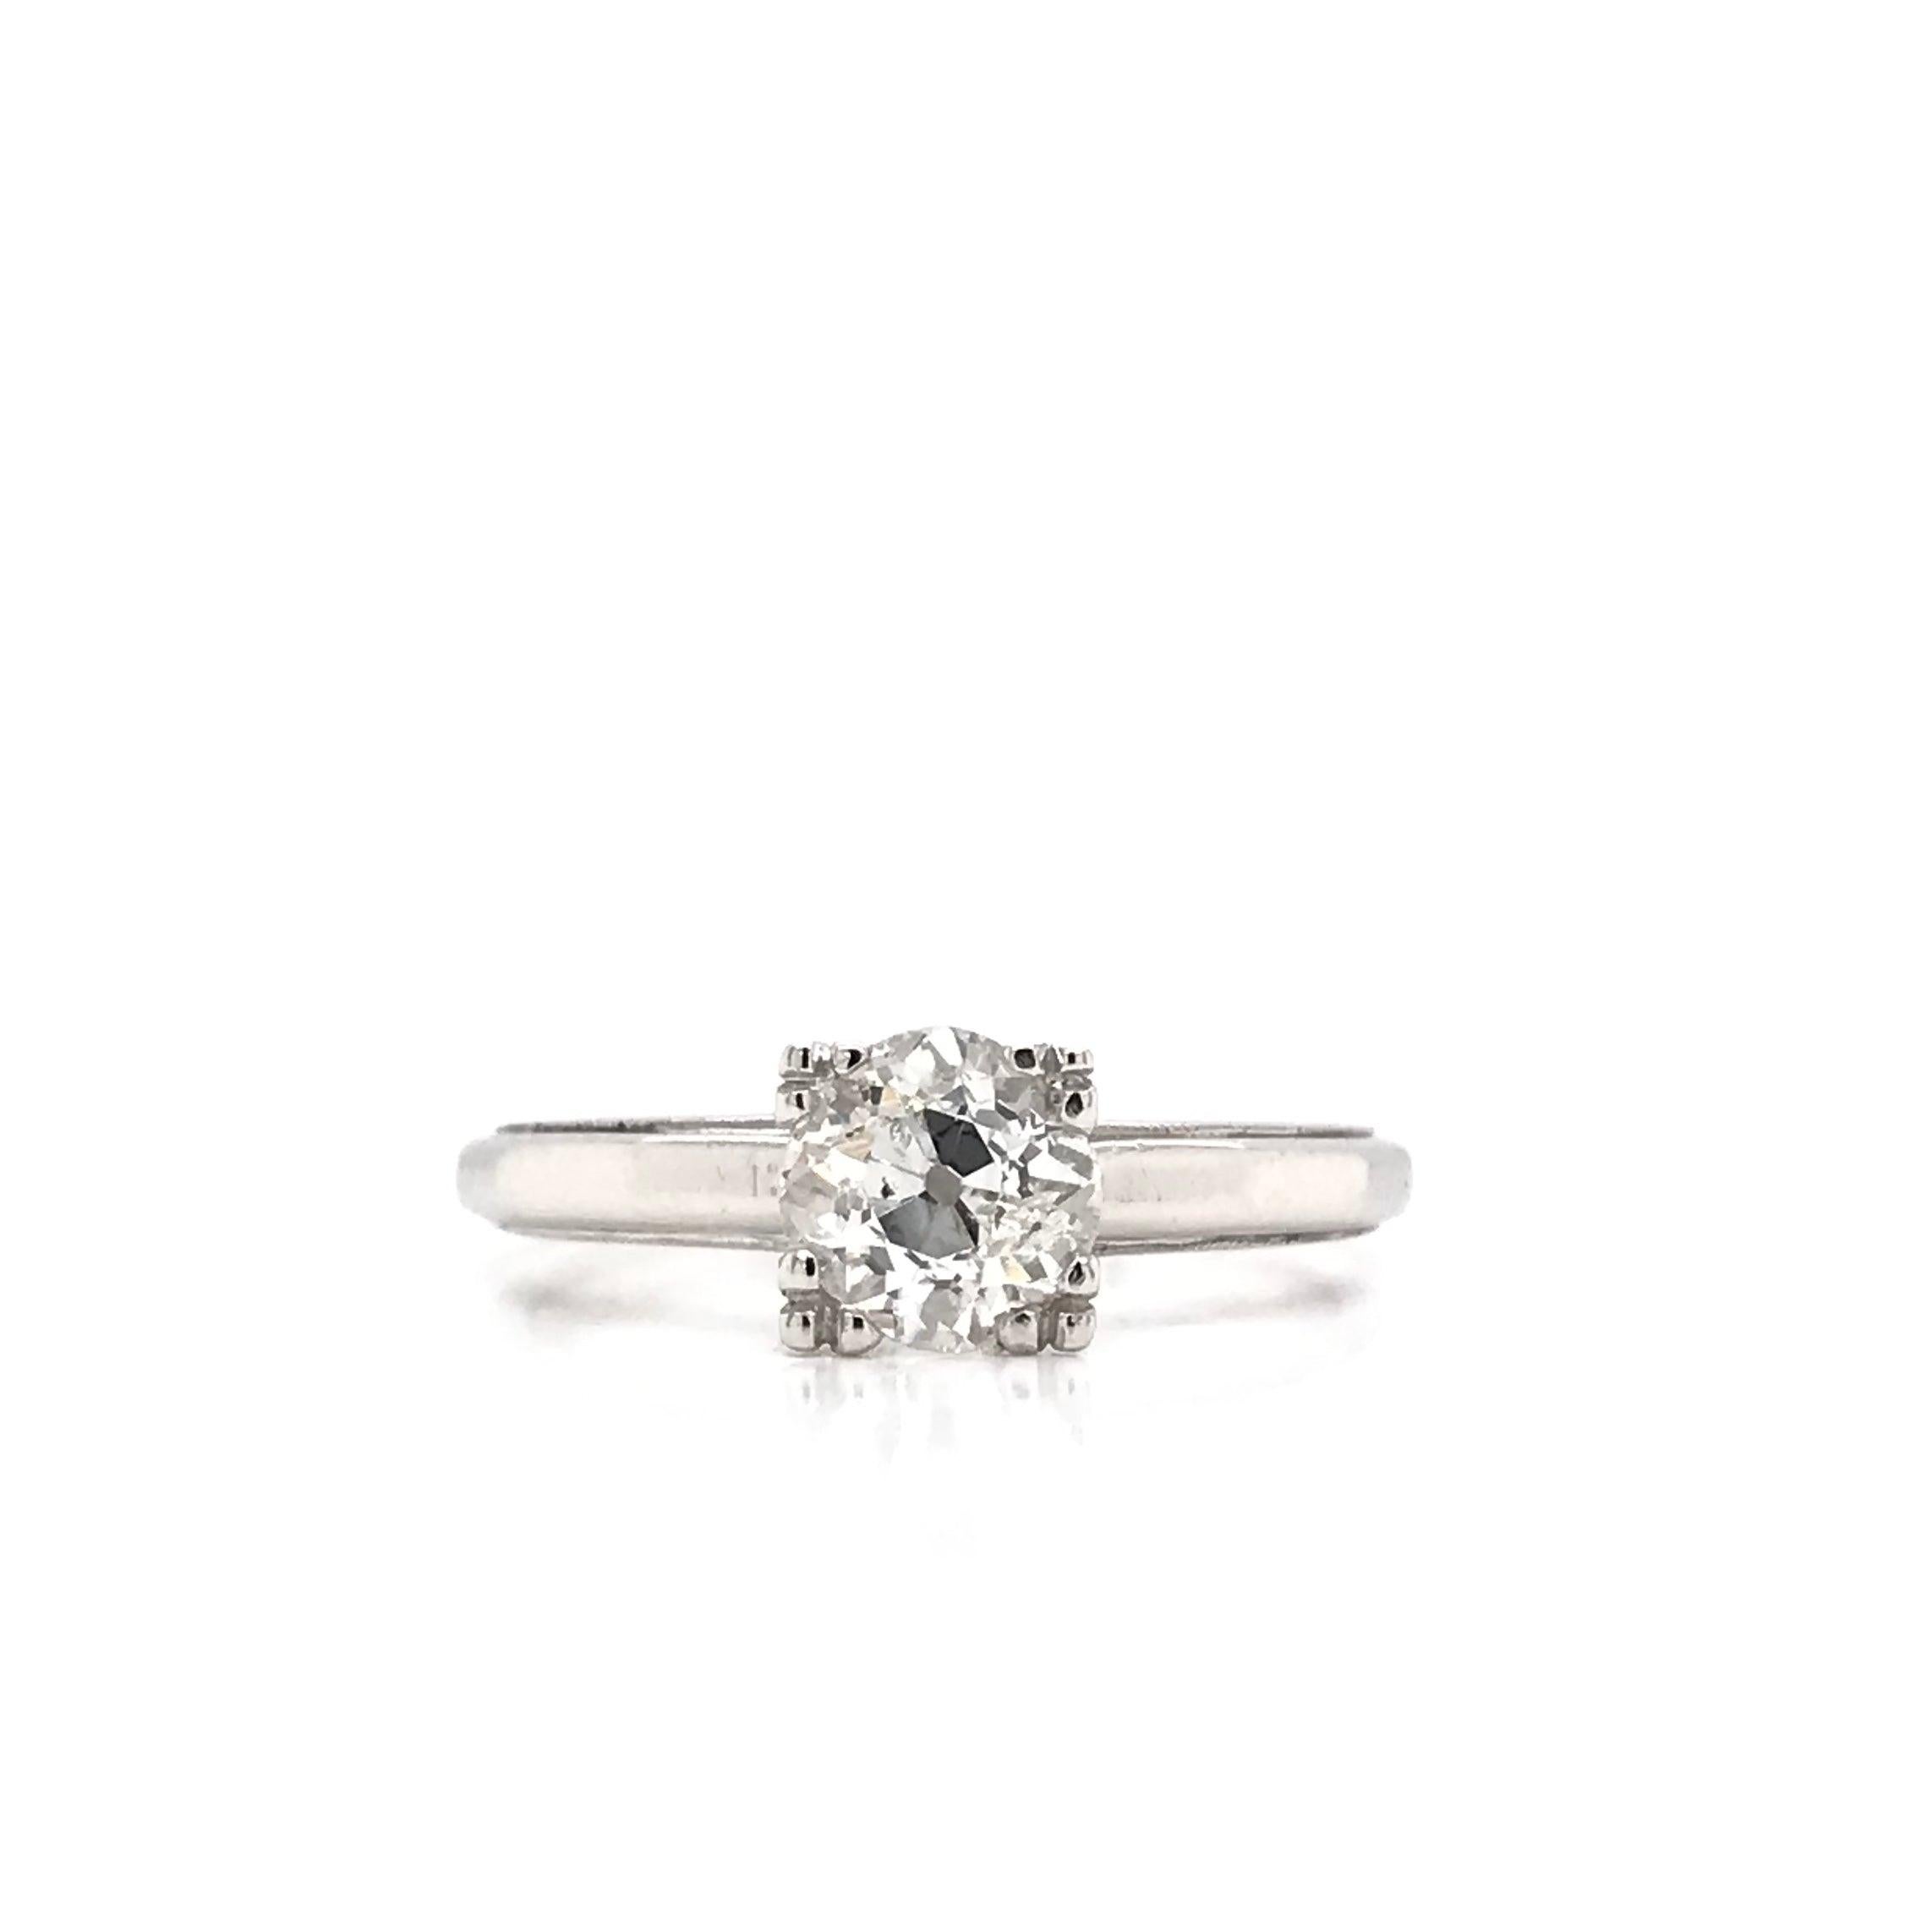 This platinum ring is an estate piece. This solitaire style ring features an antique Old Mine cut diamond in the center. Old Mine cut diamonds are often times similar to the modern cushion cut diamond. The diamond measures approximately 0.88 carats